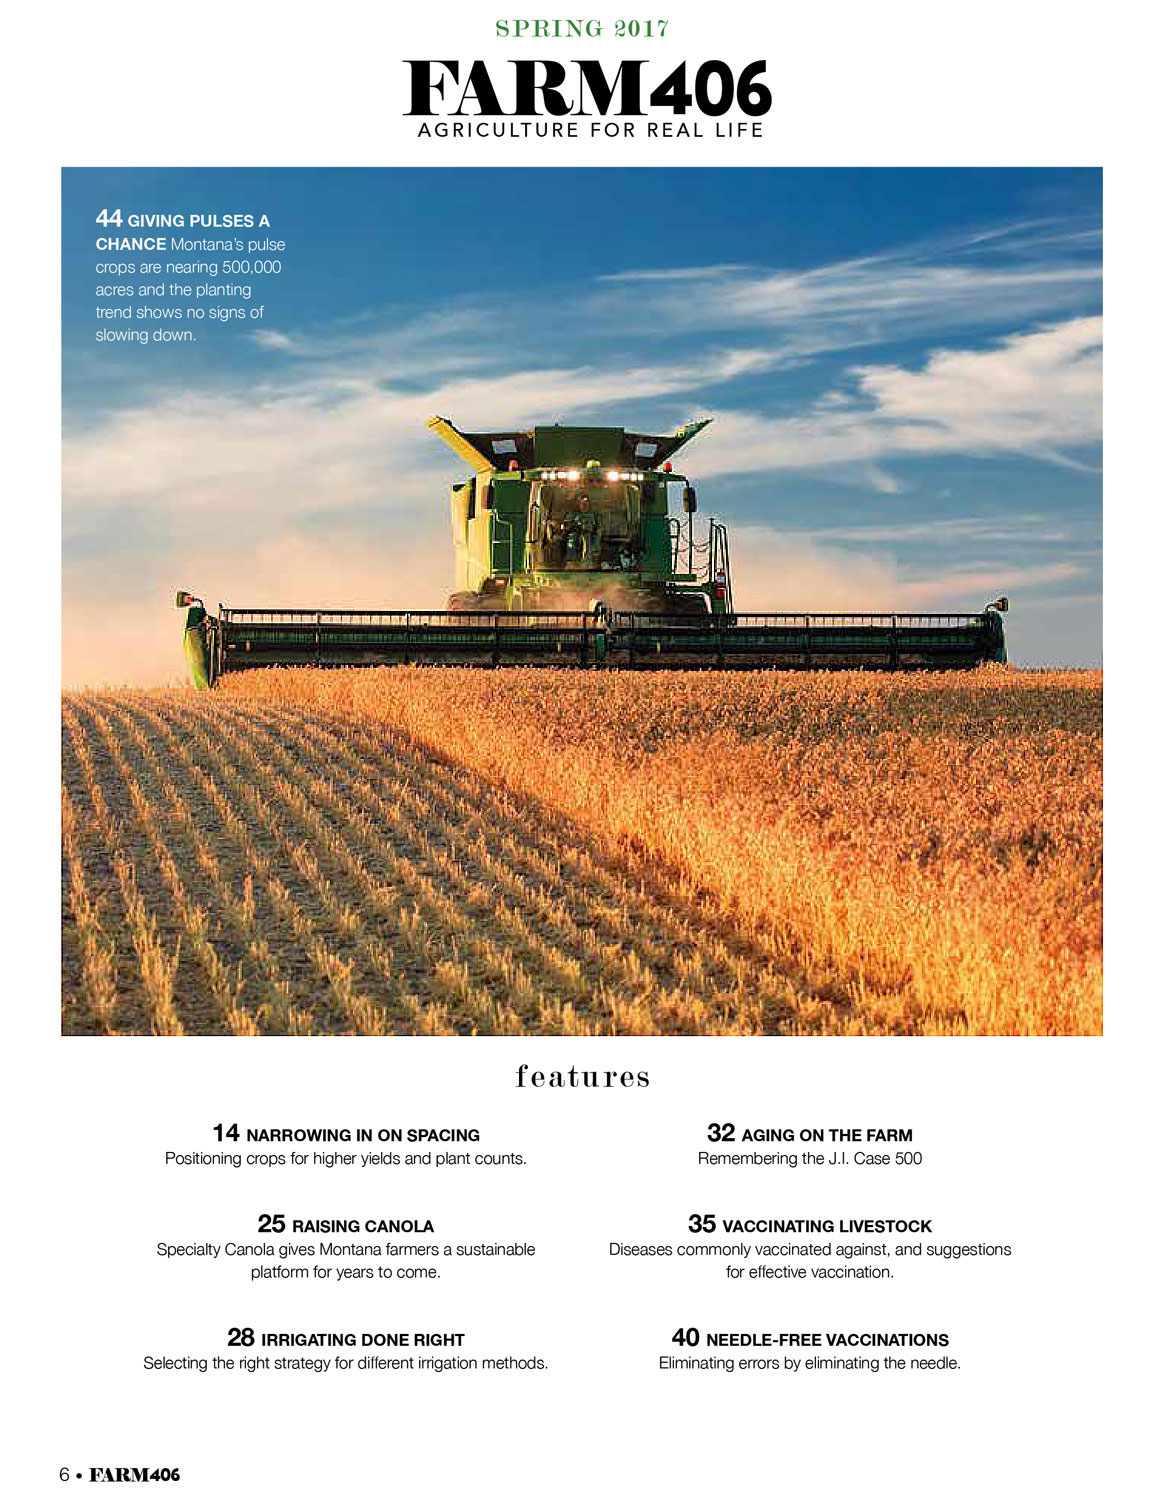 Stock-Agriculture-Photos-Used-in-Publications